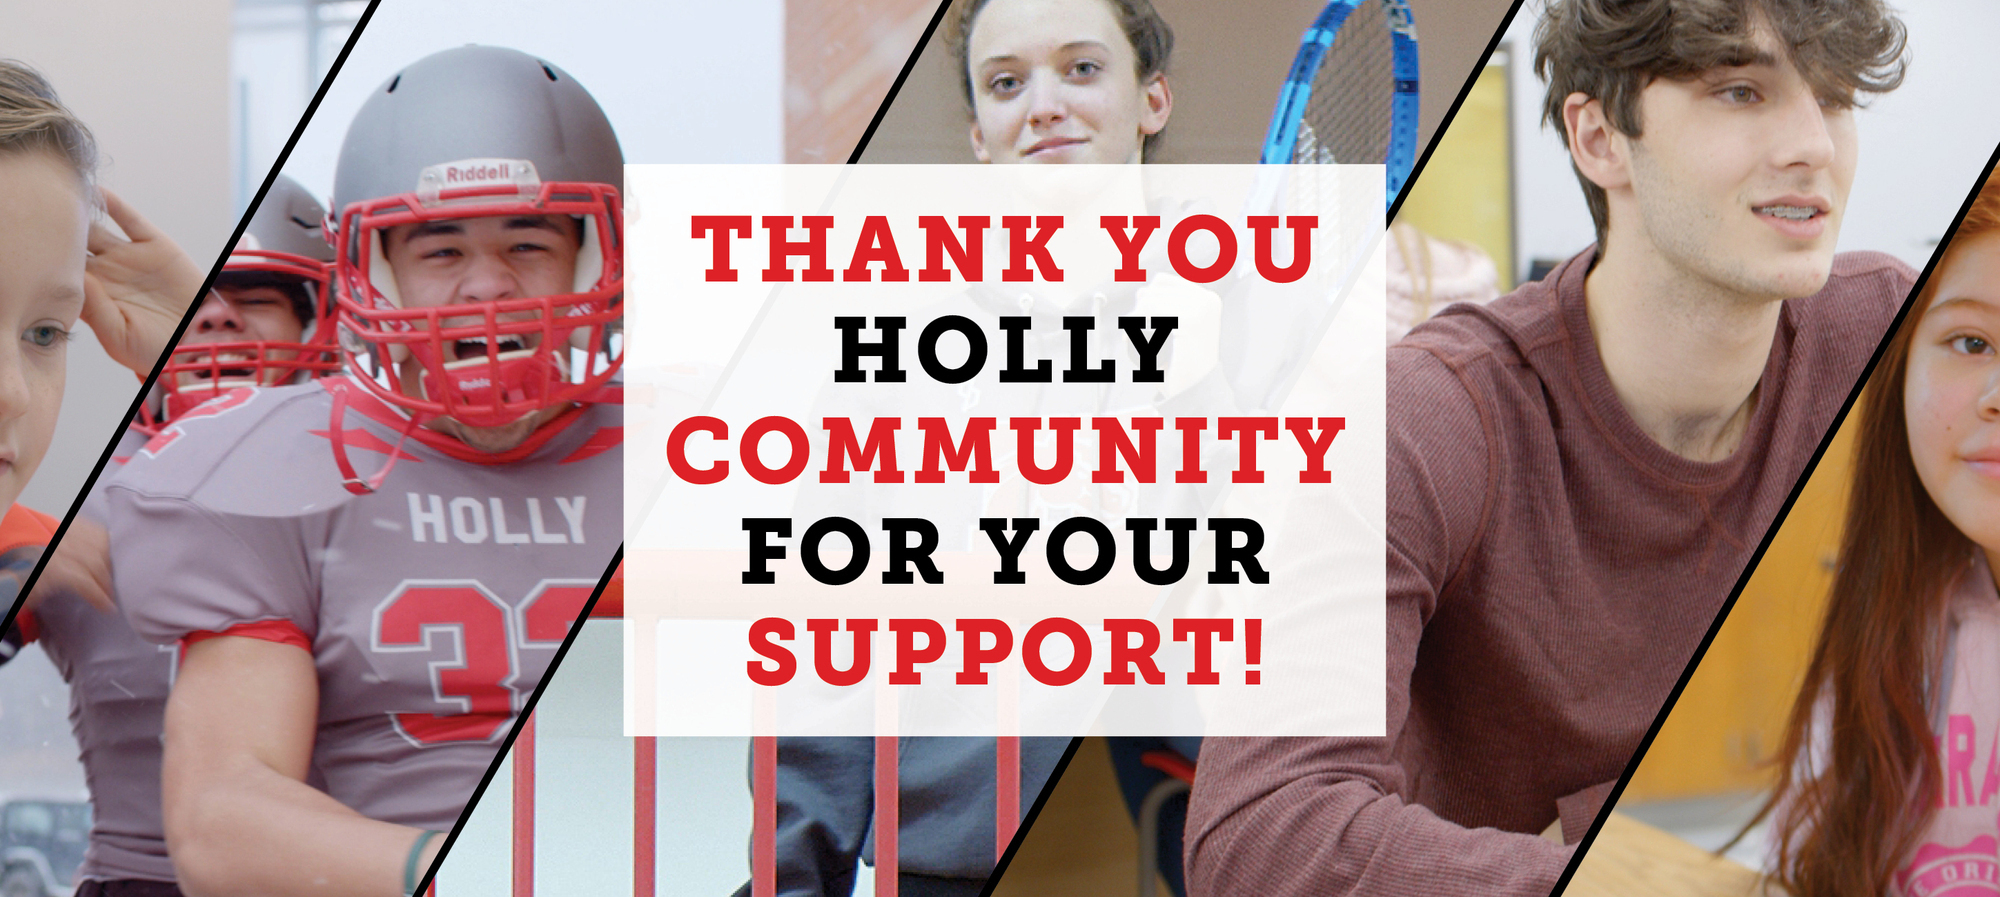 Thank you Holly Community for your support